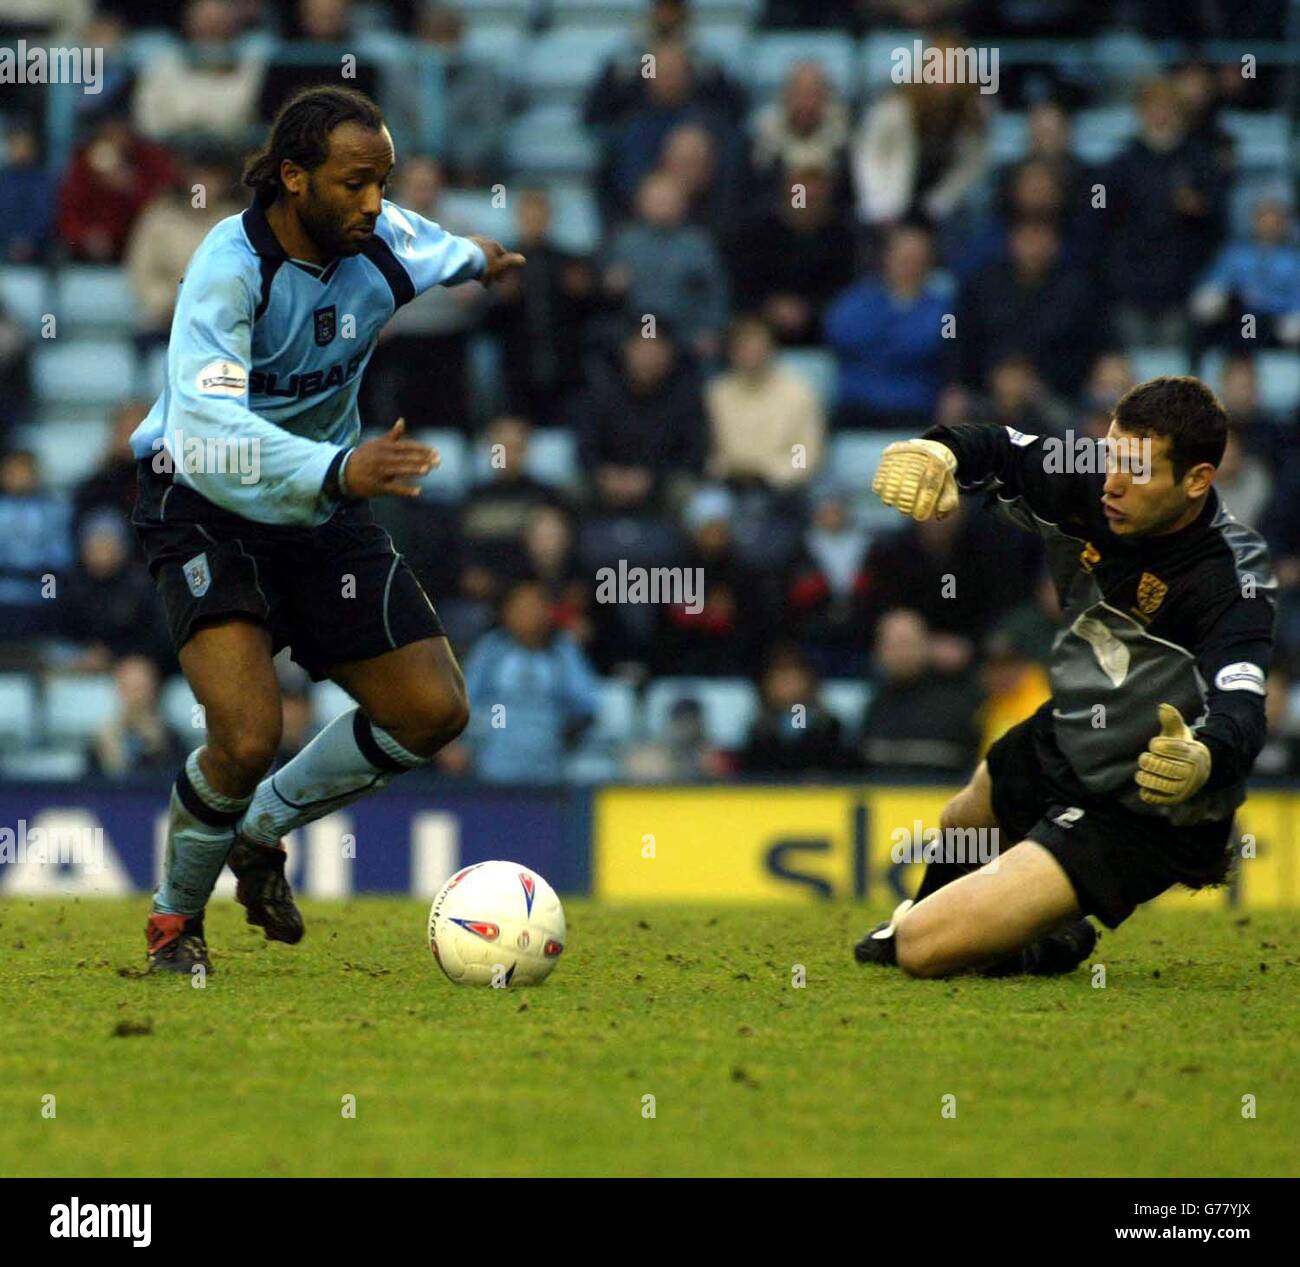 Coventry's Julian Joachim (left) rounds the Wimbledon goal-keeper to score for his team, during the Nationwide Division One match at The Highfield Road Stadium, Coventry. Final score: Coventry 2, Wimbledon 2. NO UNOFFICIAL CLUB WEBSITE USE. Stock Photo